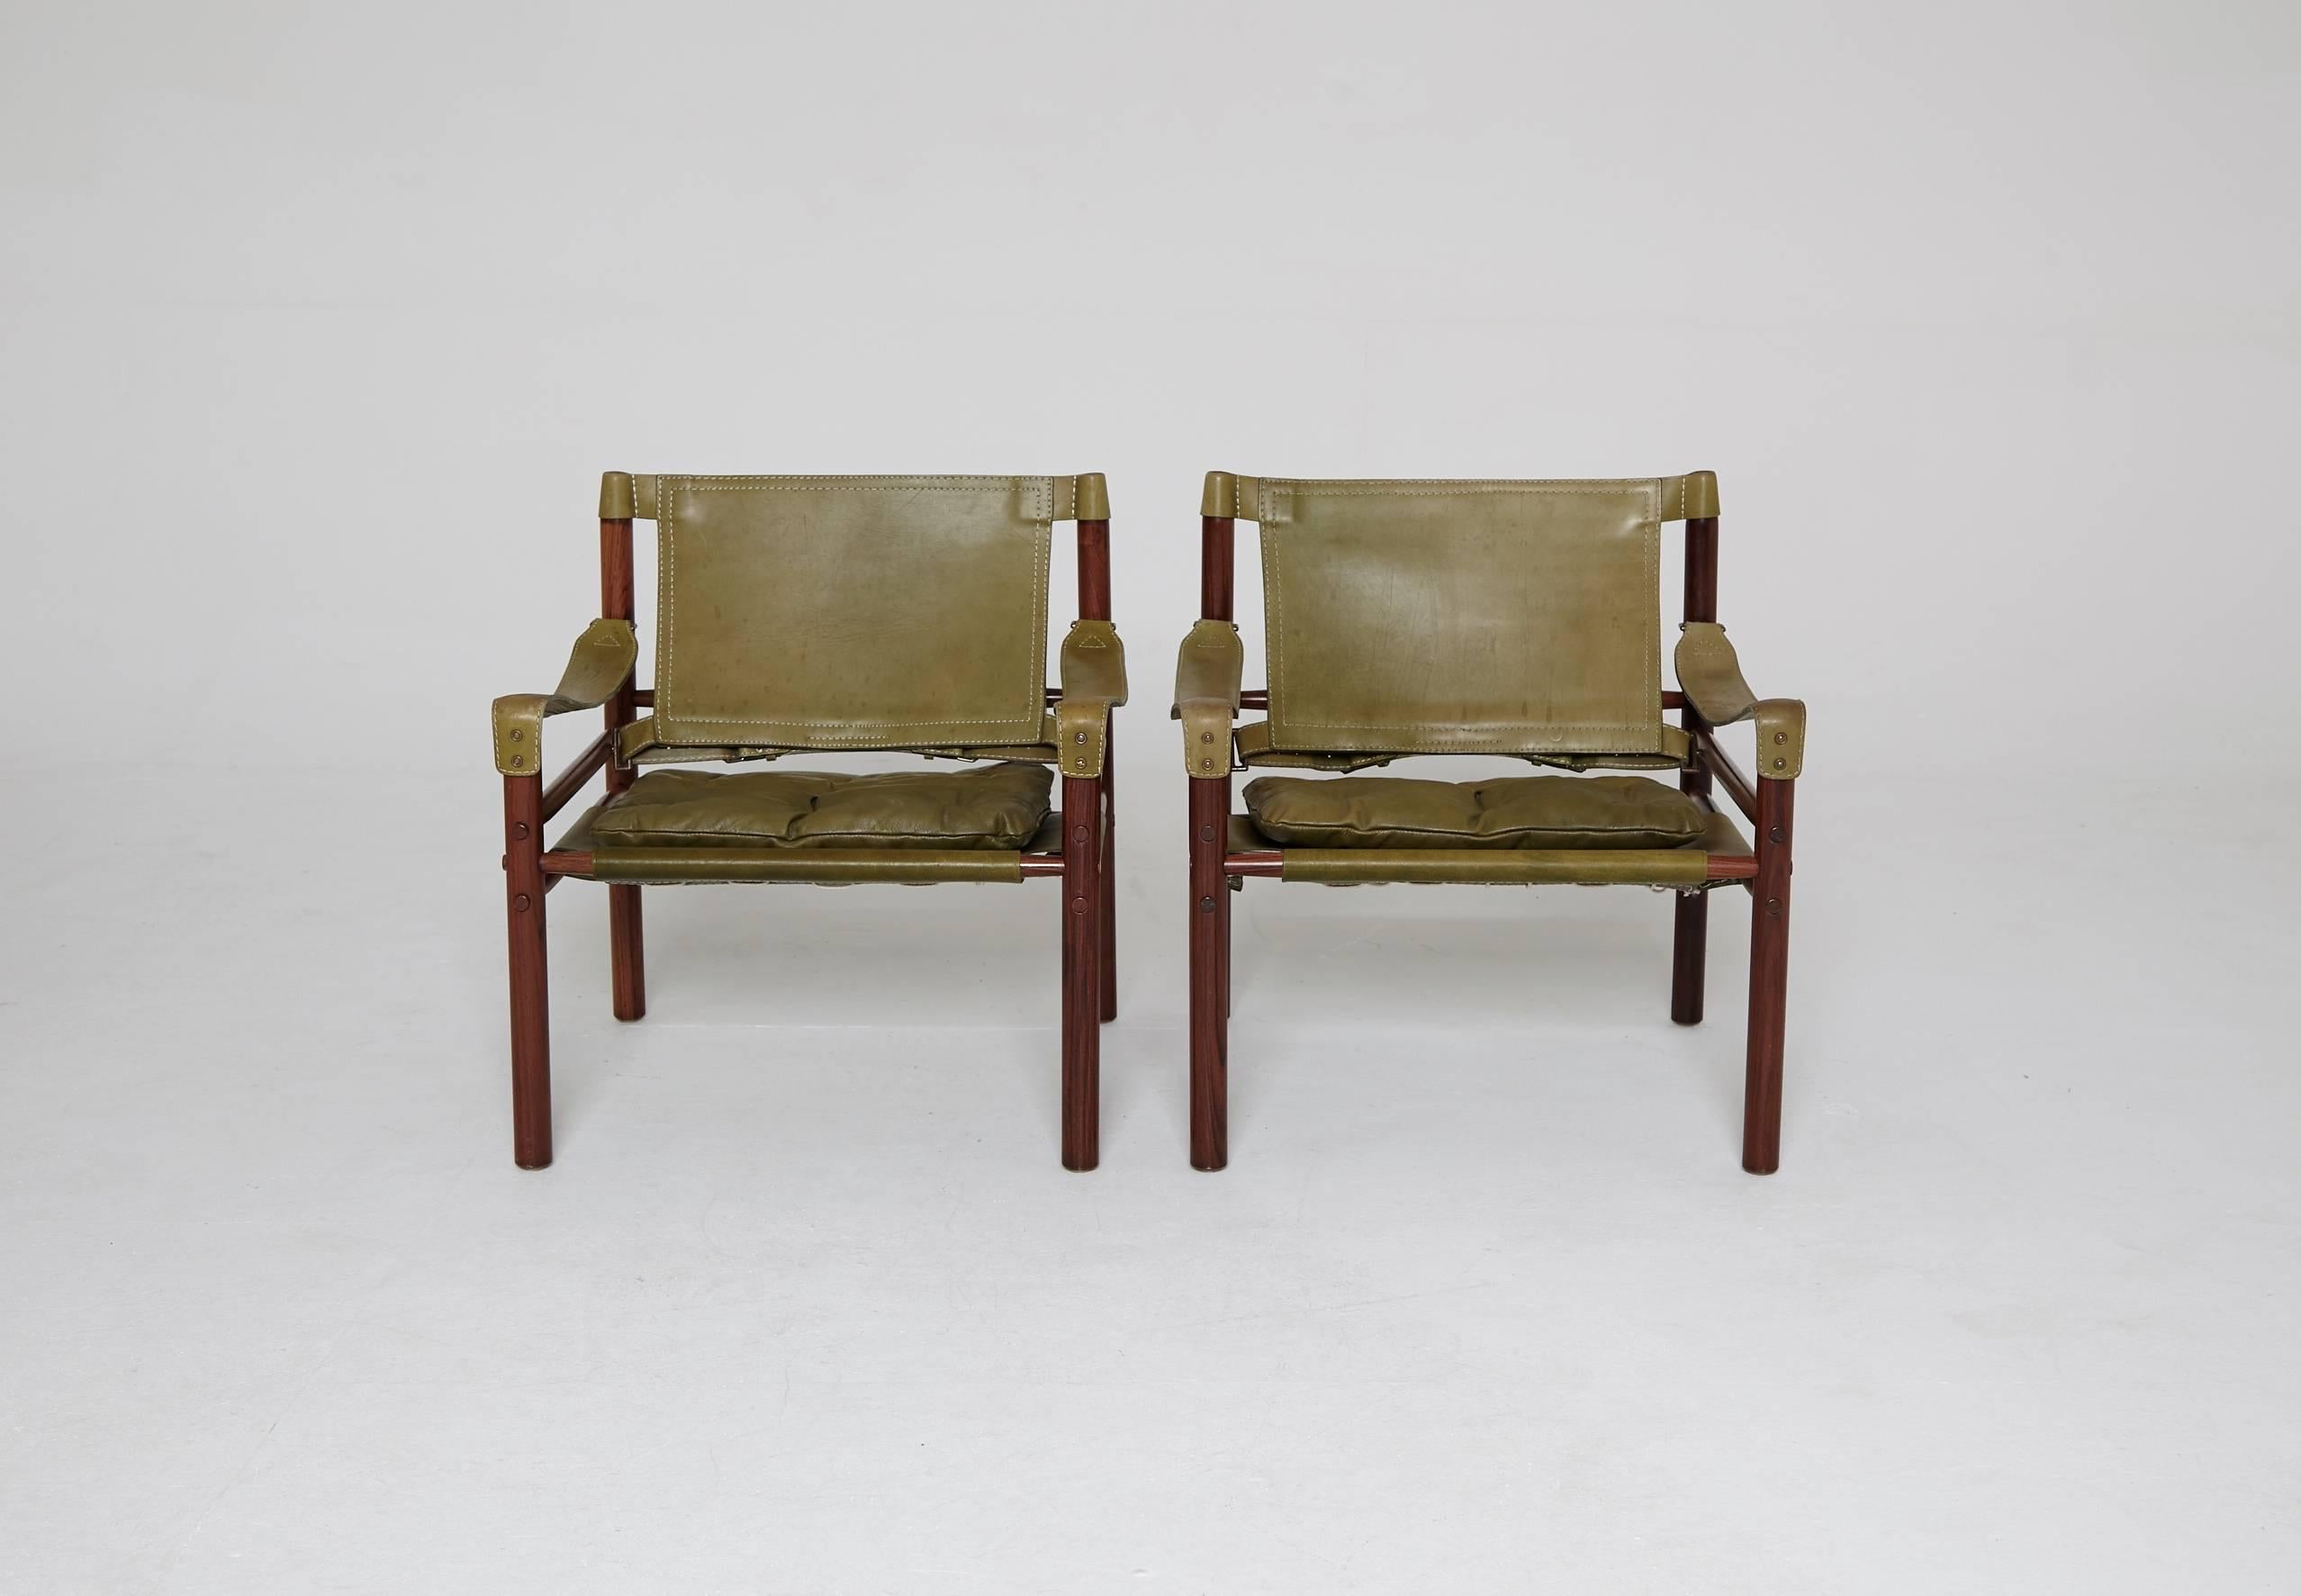 A beautiful original pair of Arne Norell safari sirocco chairs in rosewood and green leather, 1960s-1970s, Sweden.